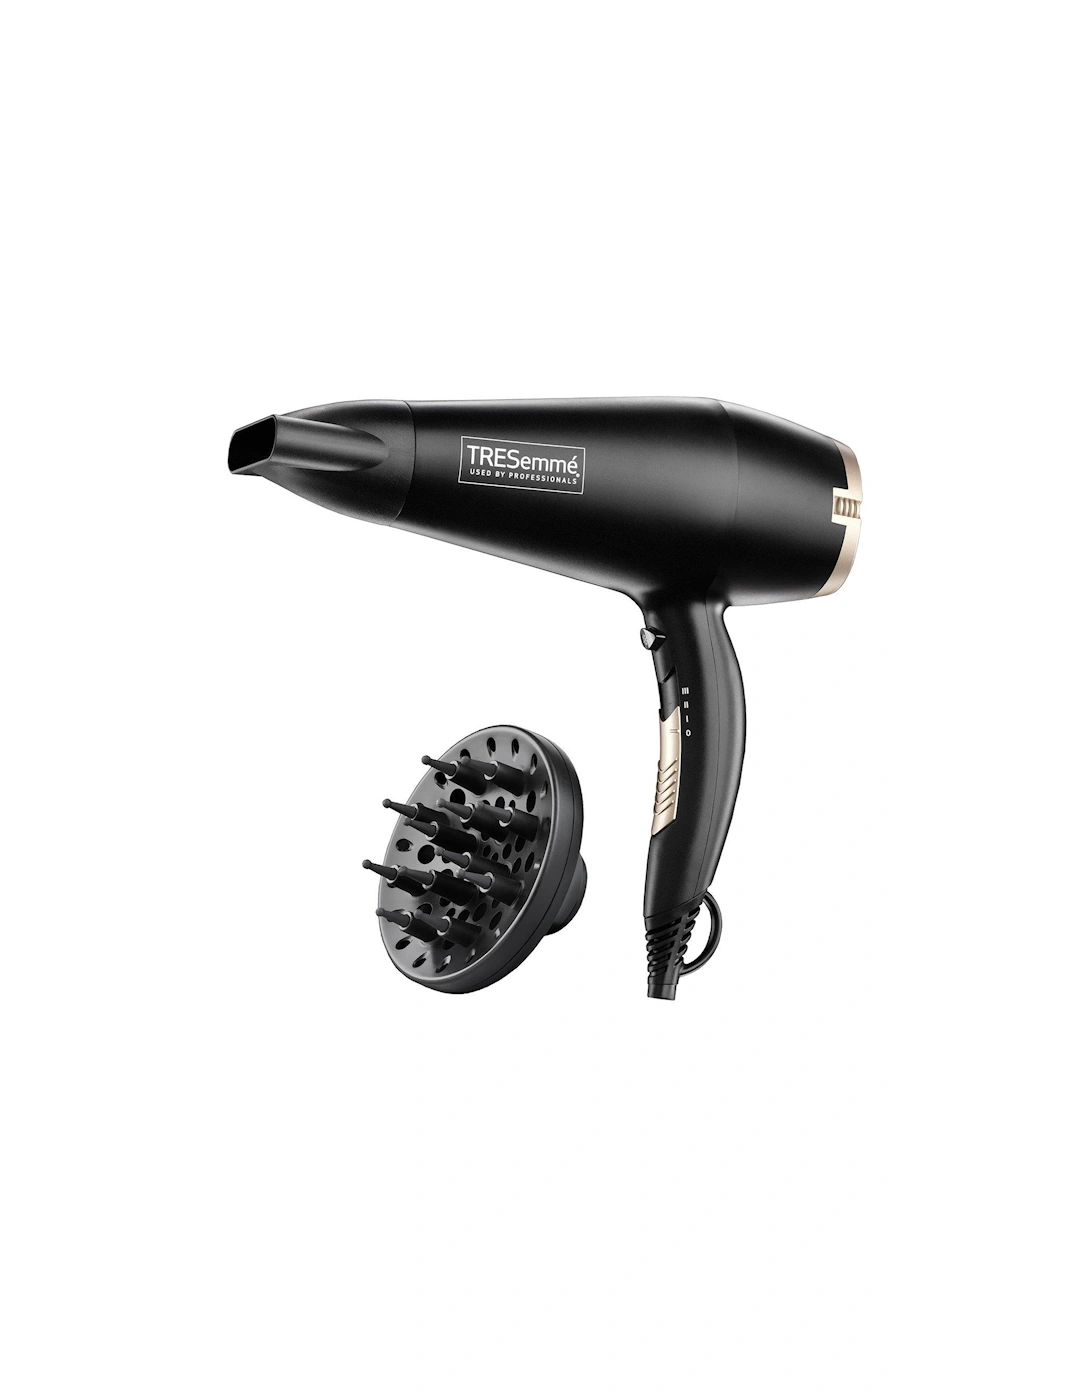 5543U Diffuser 2200-watt Hairdryer -  3 heat and 2 speed settings, as well as a cool shot button, 2 of 1